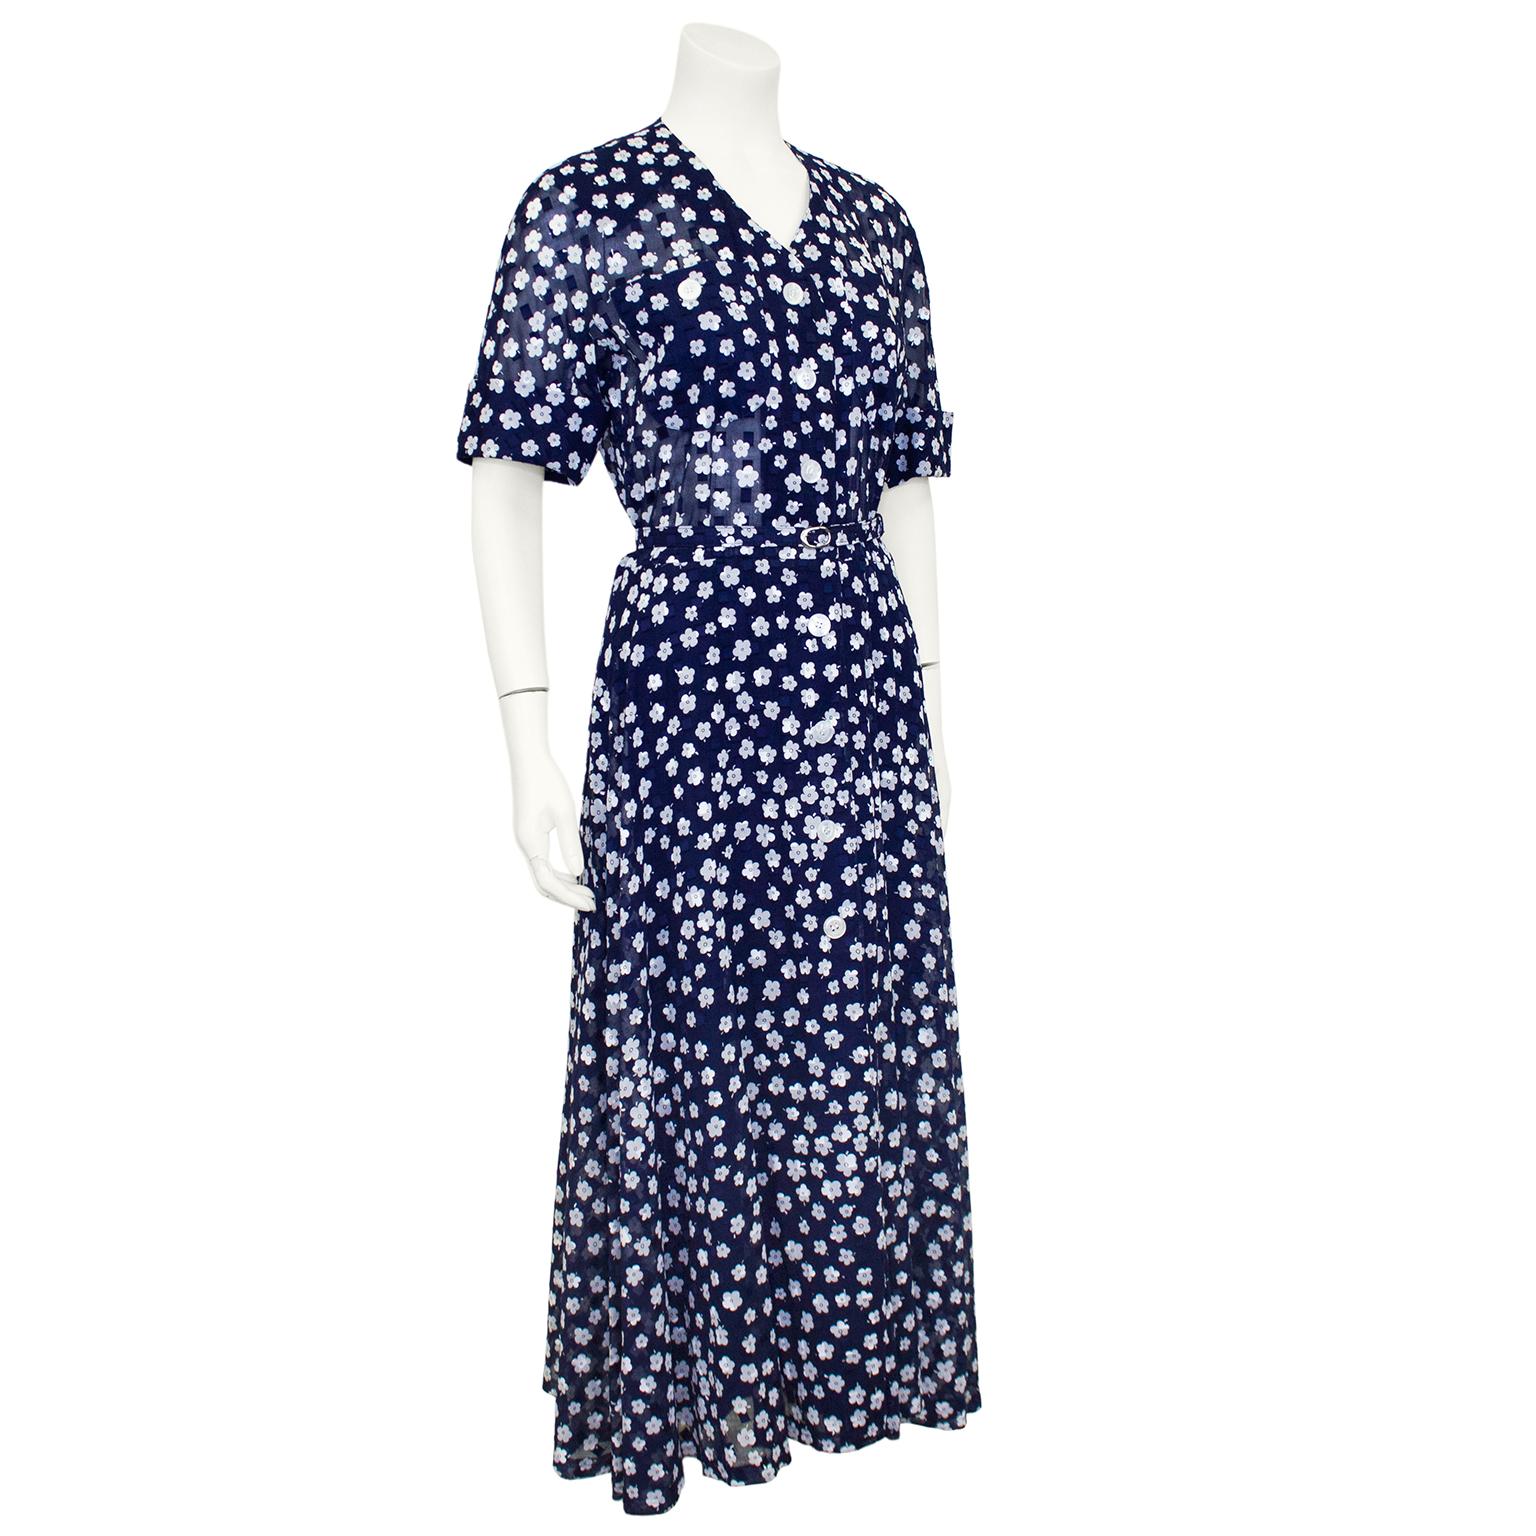 Beautiful and elegant Akris shirt dress from the 2000's. Navy blue cotton jacquard with all over monochromatic squares and white flowers. V neckline, cuffed short sleeves and belted at the waist. Patch pockets at bust and large, round white plastic